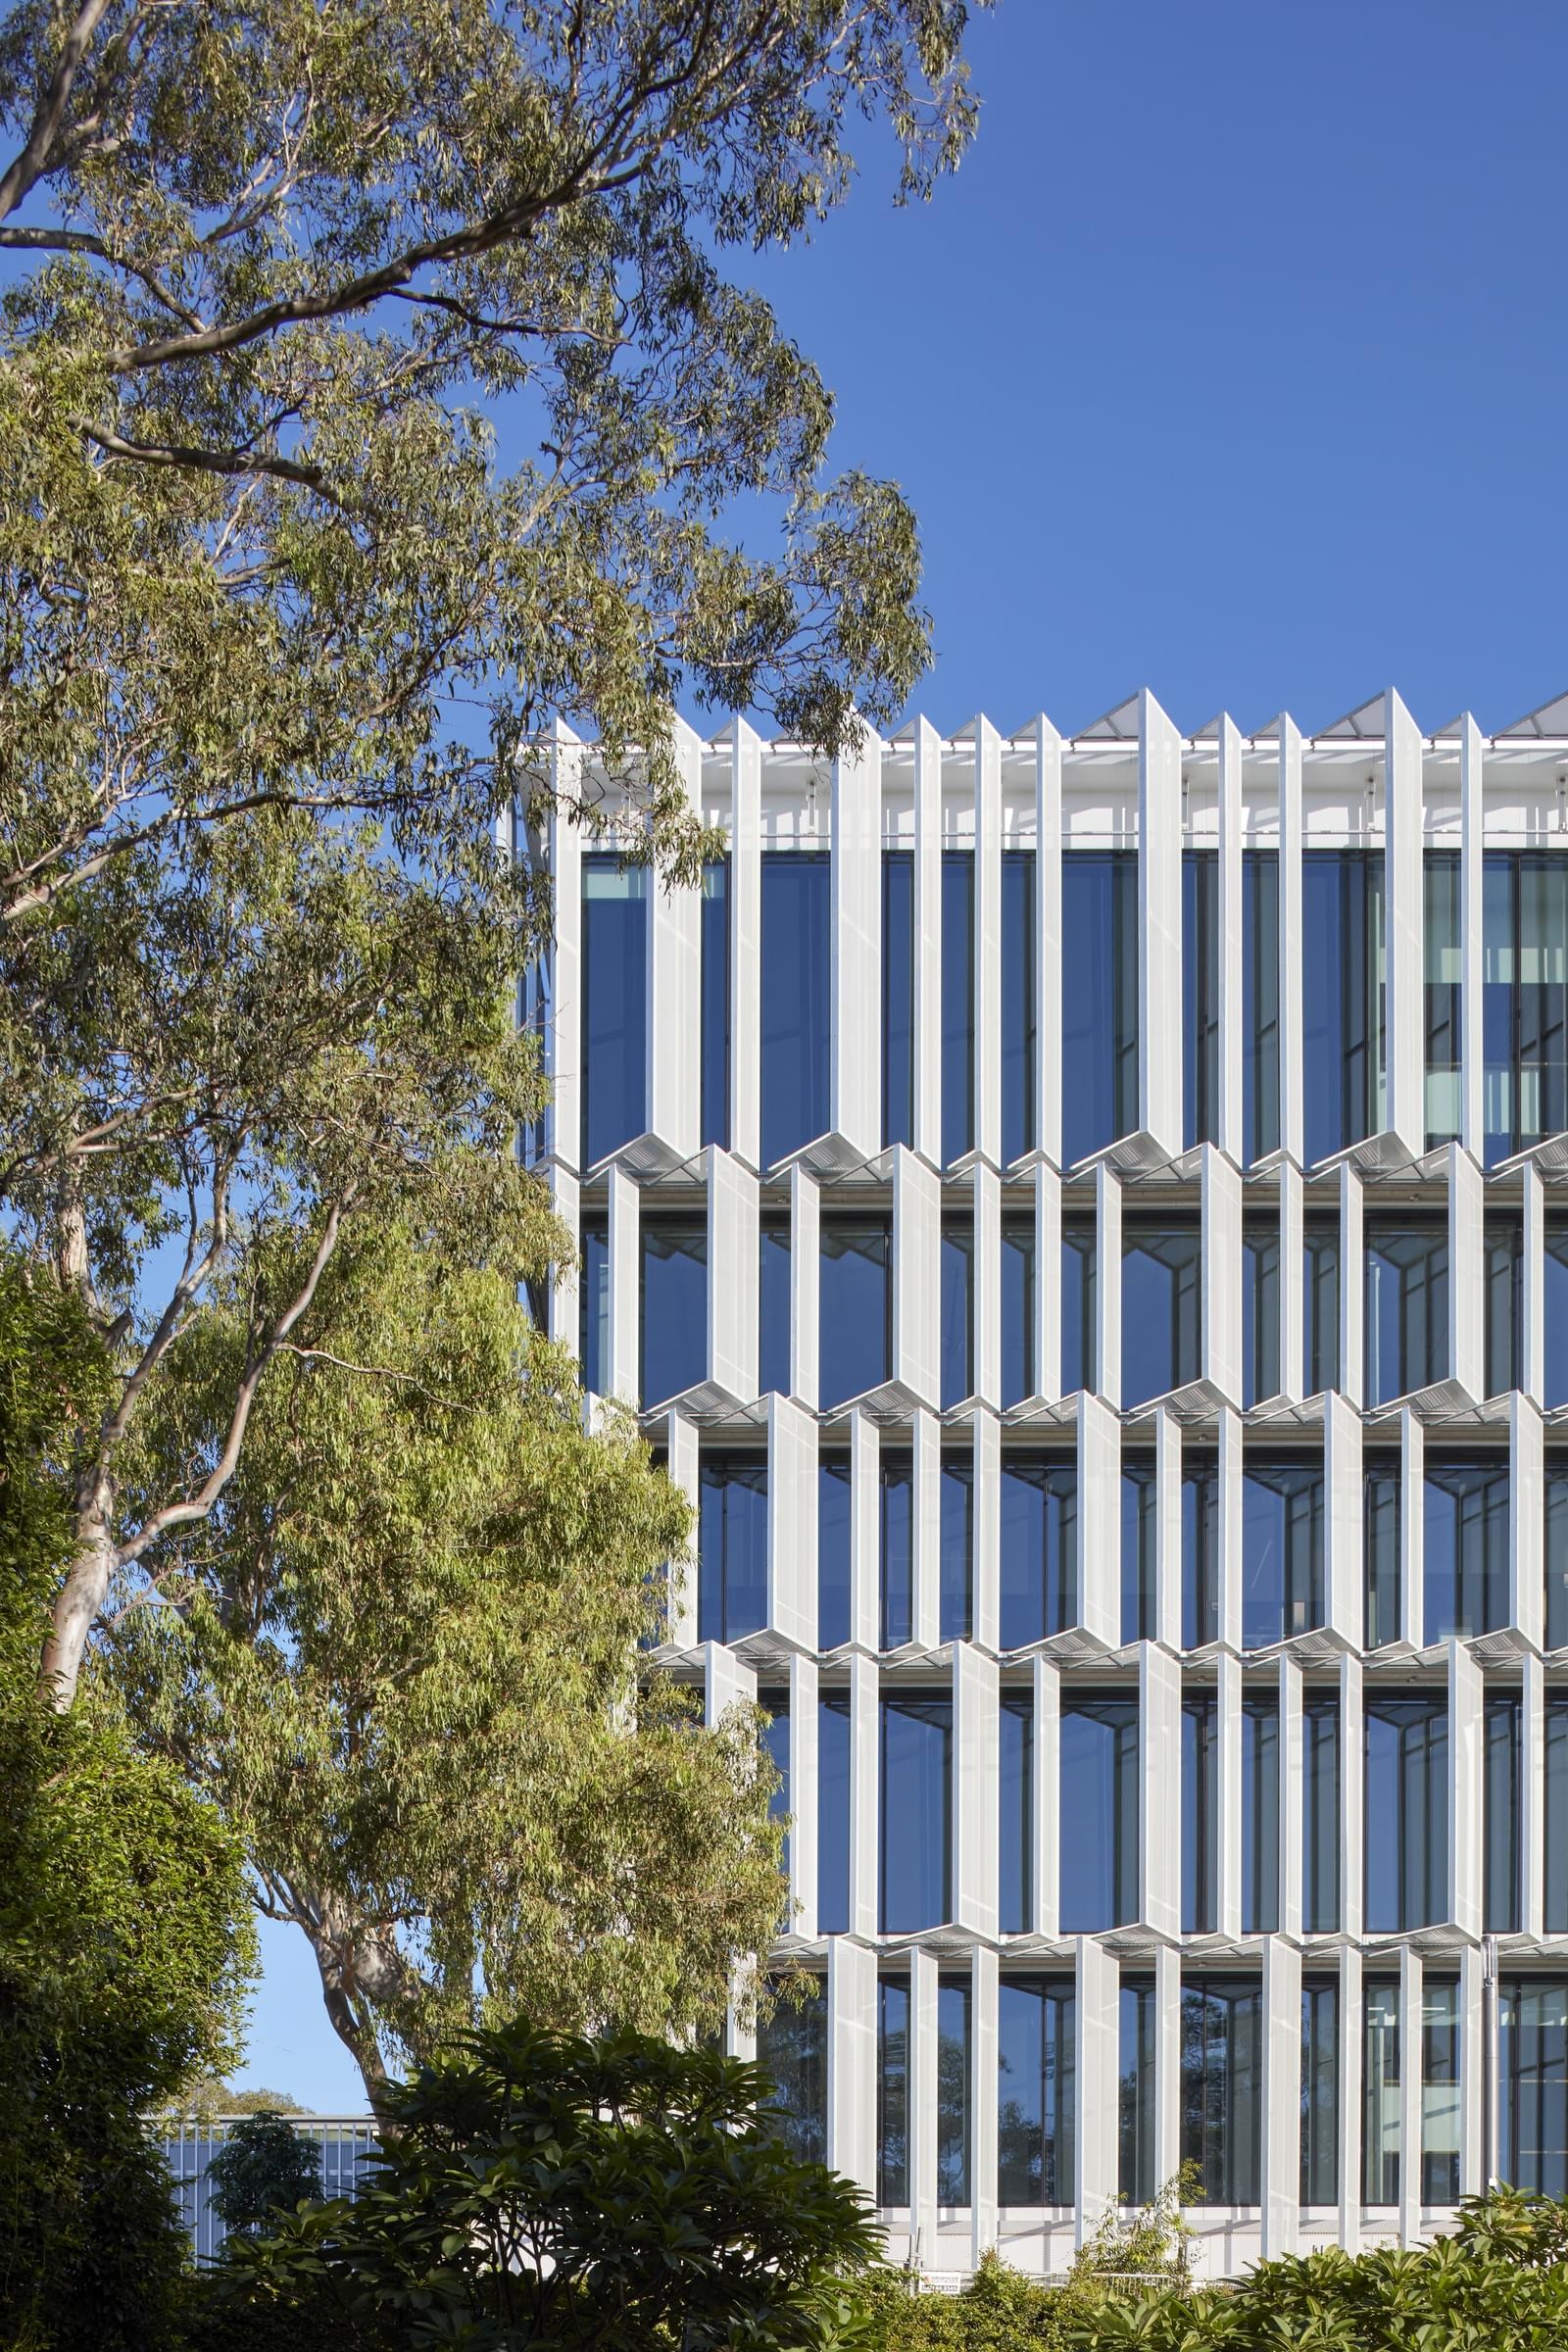 Queensland University of Technology by Henning Larsen Architects and Wilson Architects